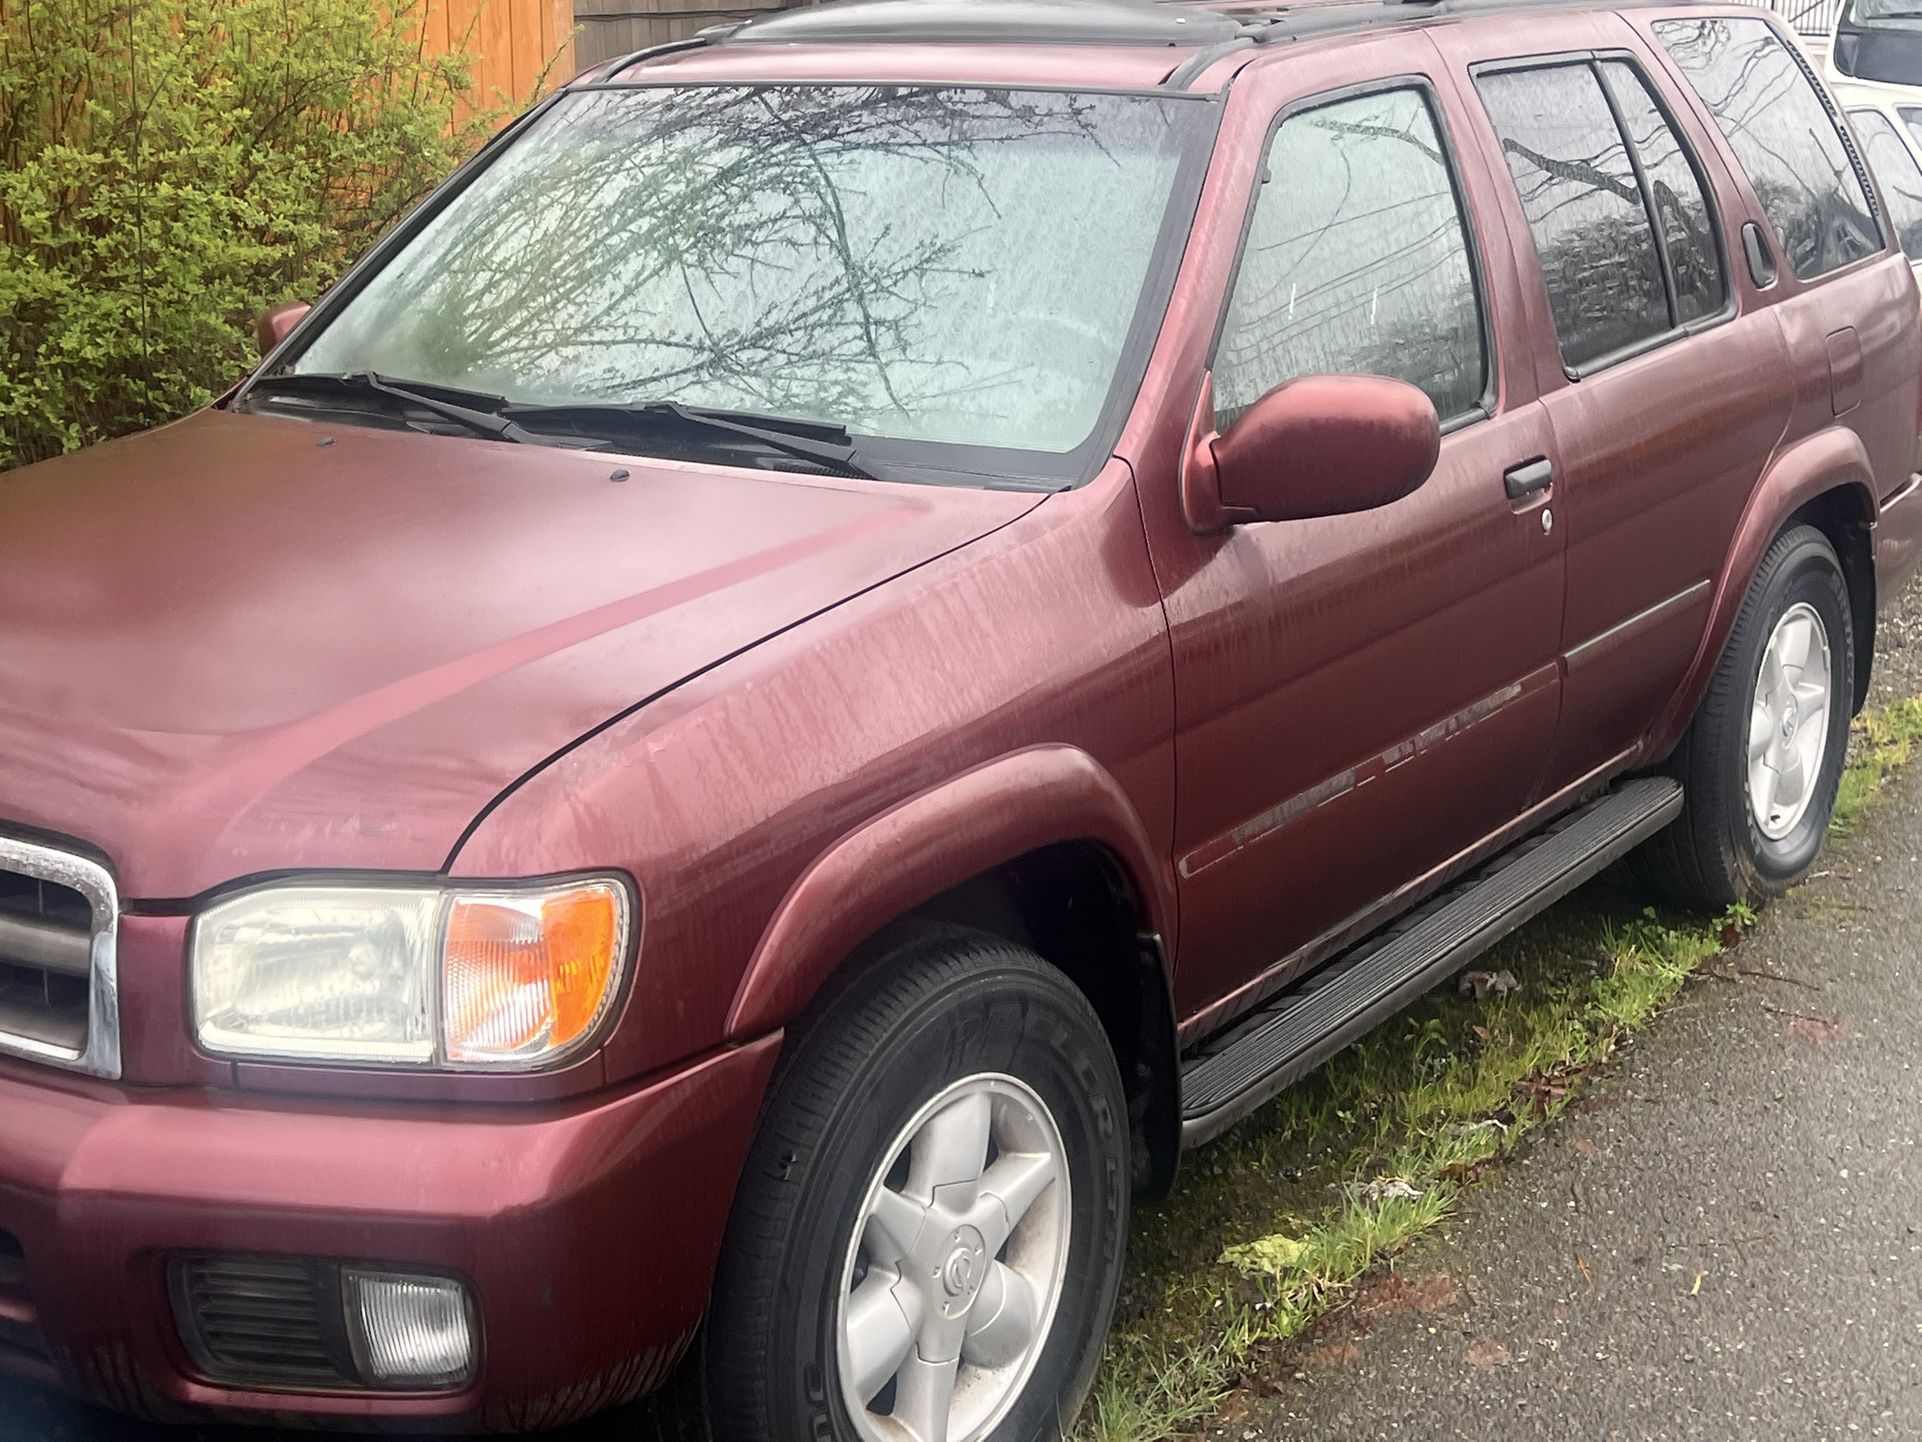 2002 Nisan Pathfinder Ran Perfect Before Someone Tried To Use Wrong Keys 